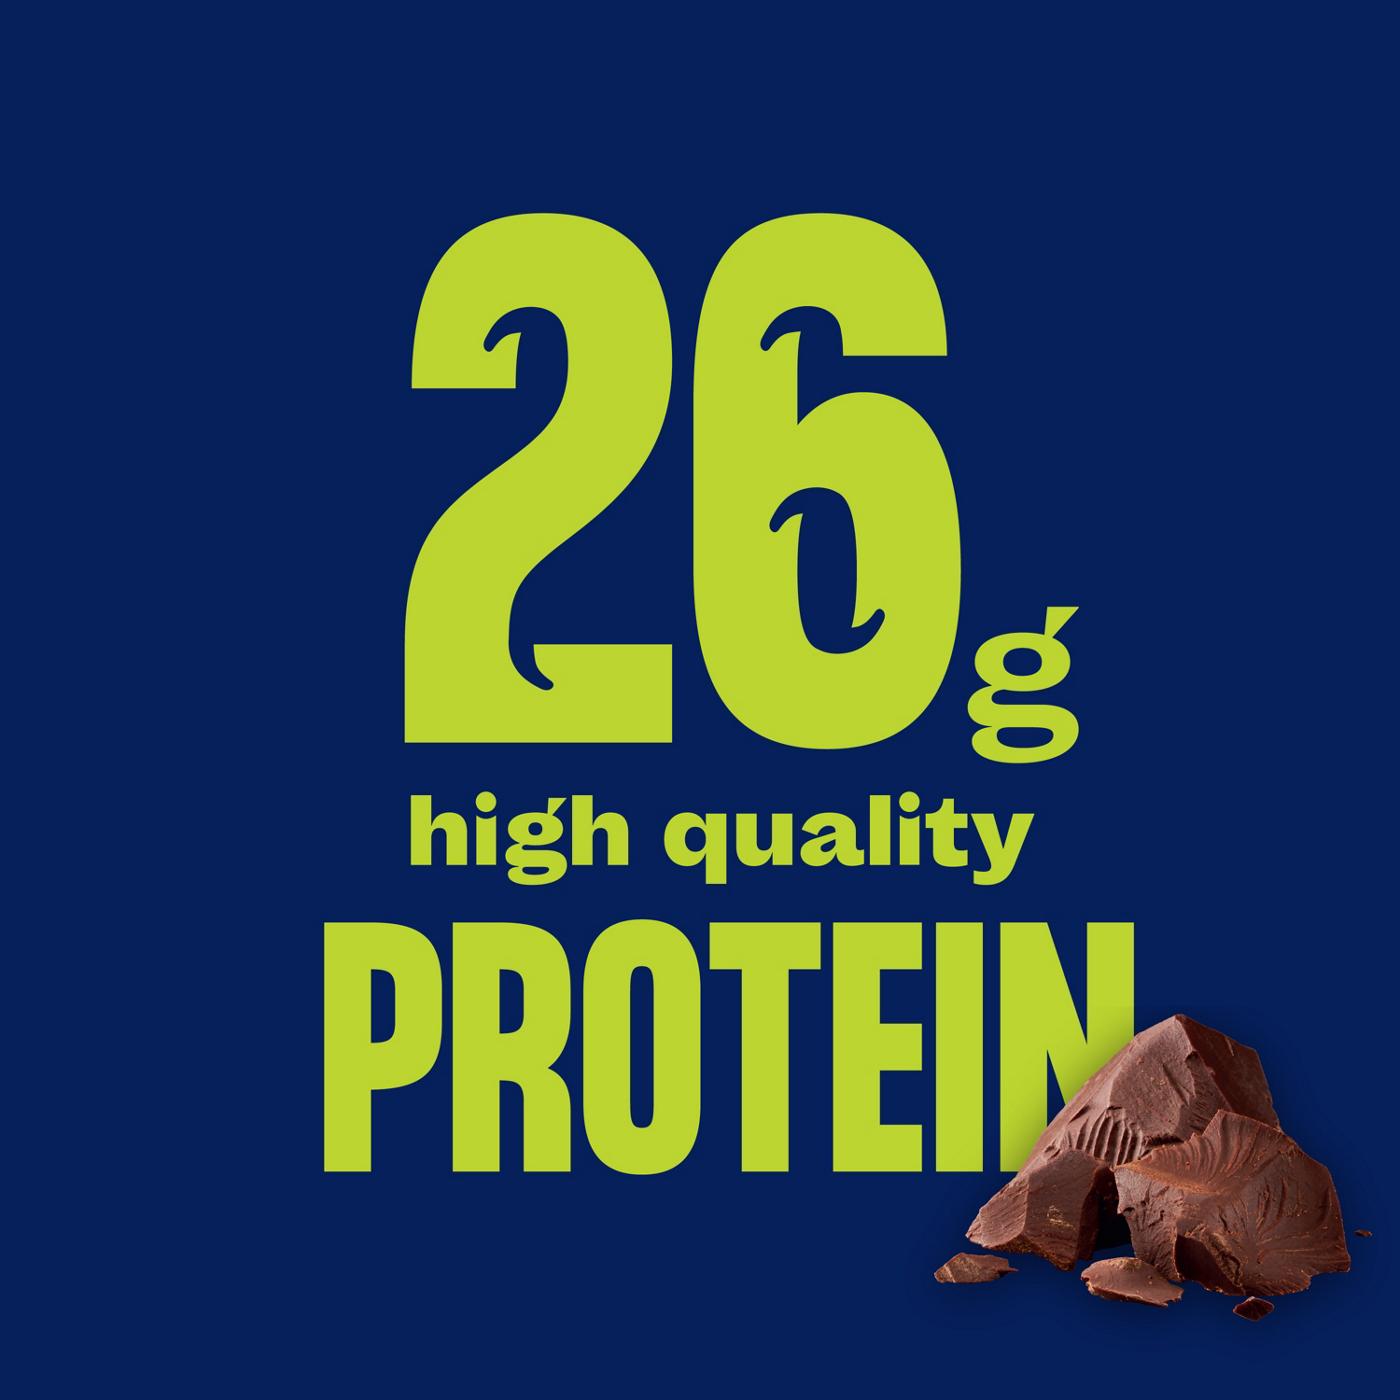 Core Power Complete 26g Protein Shakes - Chocolate, 12 Pk; image 2 of 7